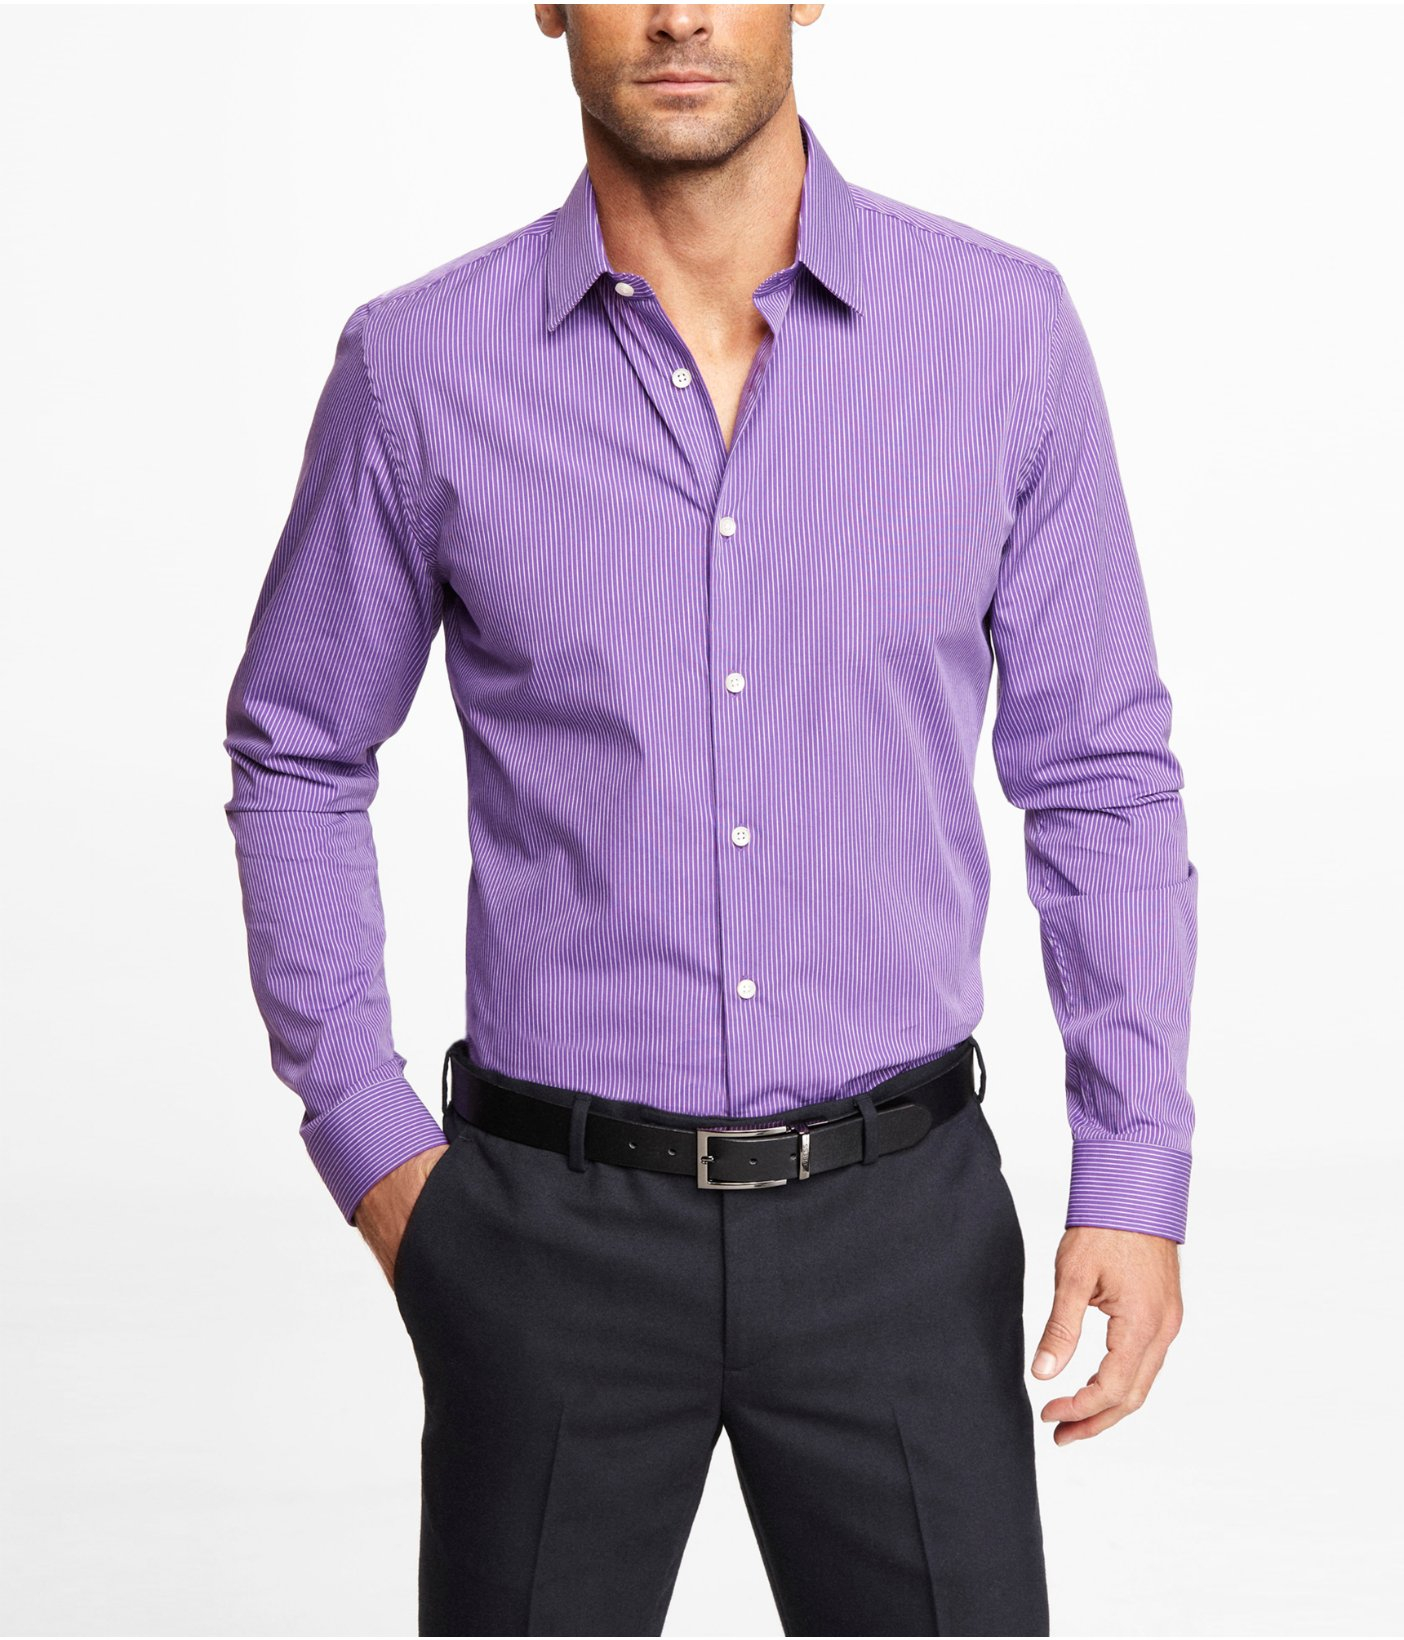 Express Fitted Striped Dress Shirt in Purple for Men - Lyst